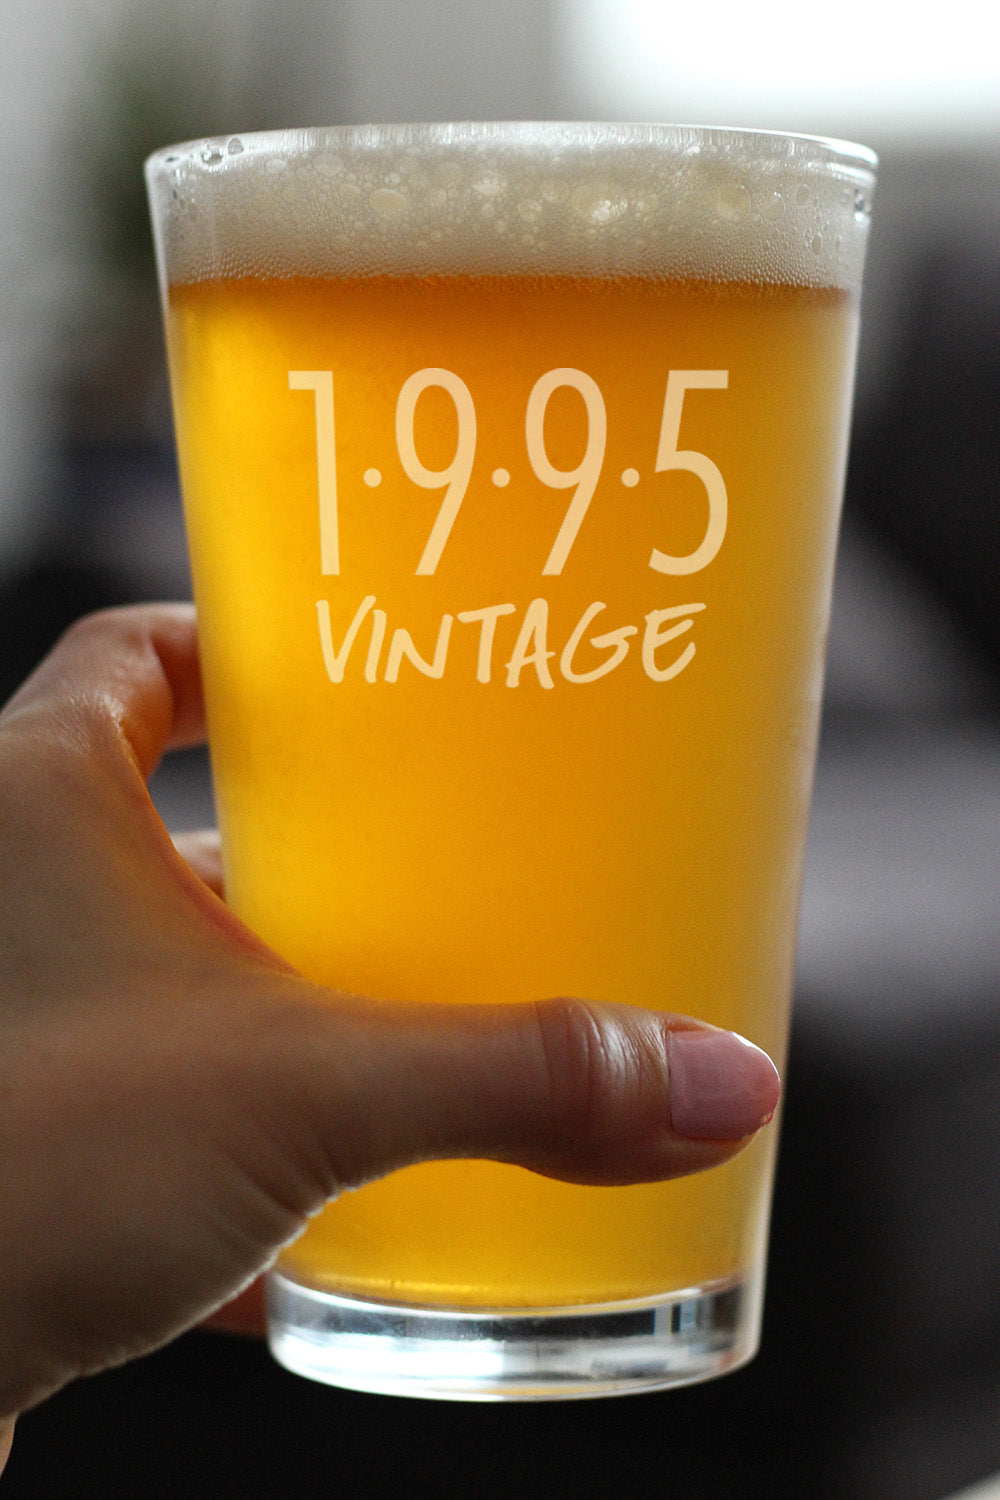 Vintage 1995 - Pint Glass for Beer - 29th Birthday Gifts for Men or Women Turning 29 - Fun Bday Party Decor - 16 oz